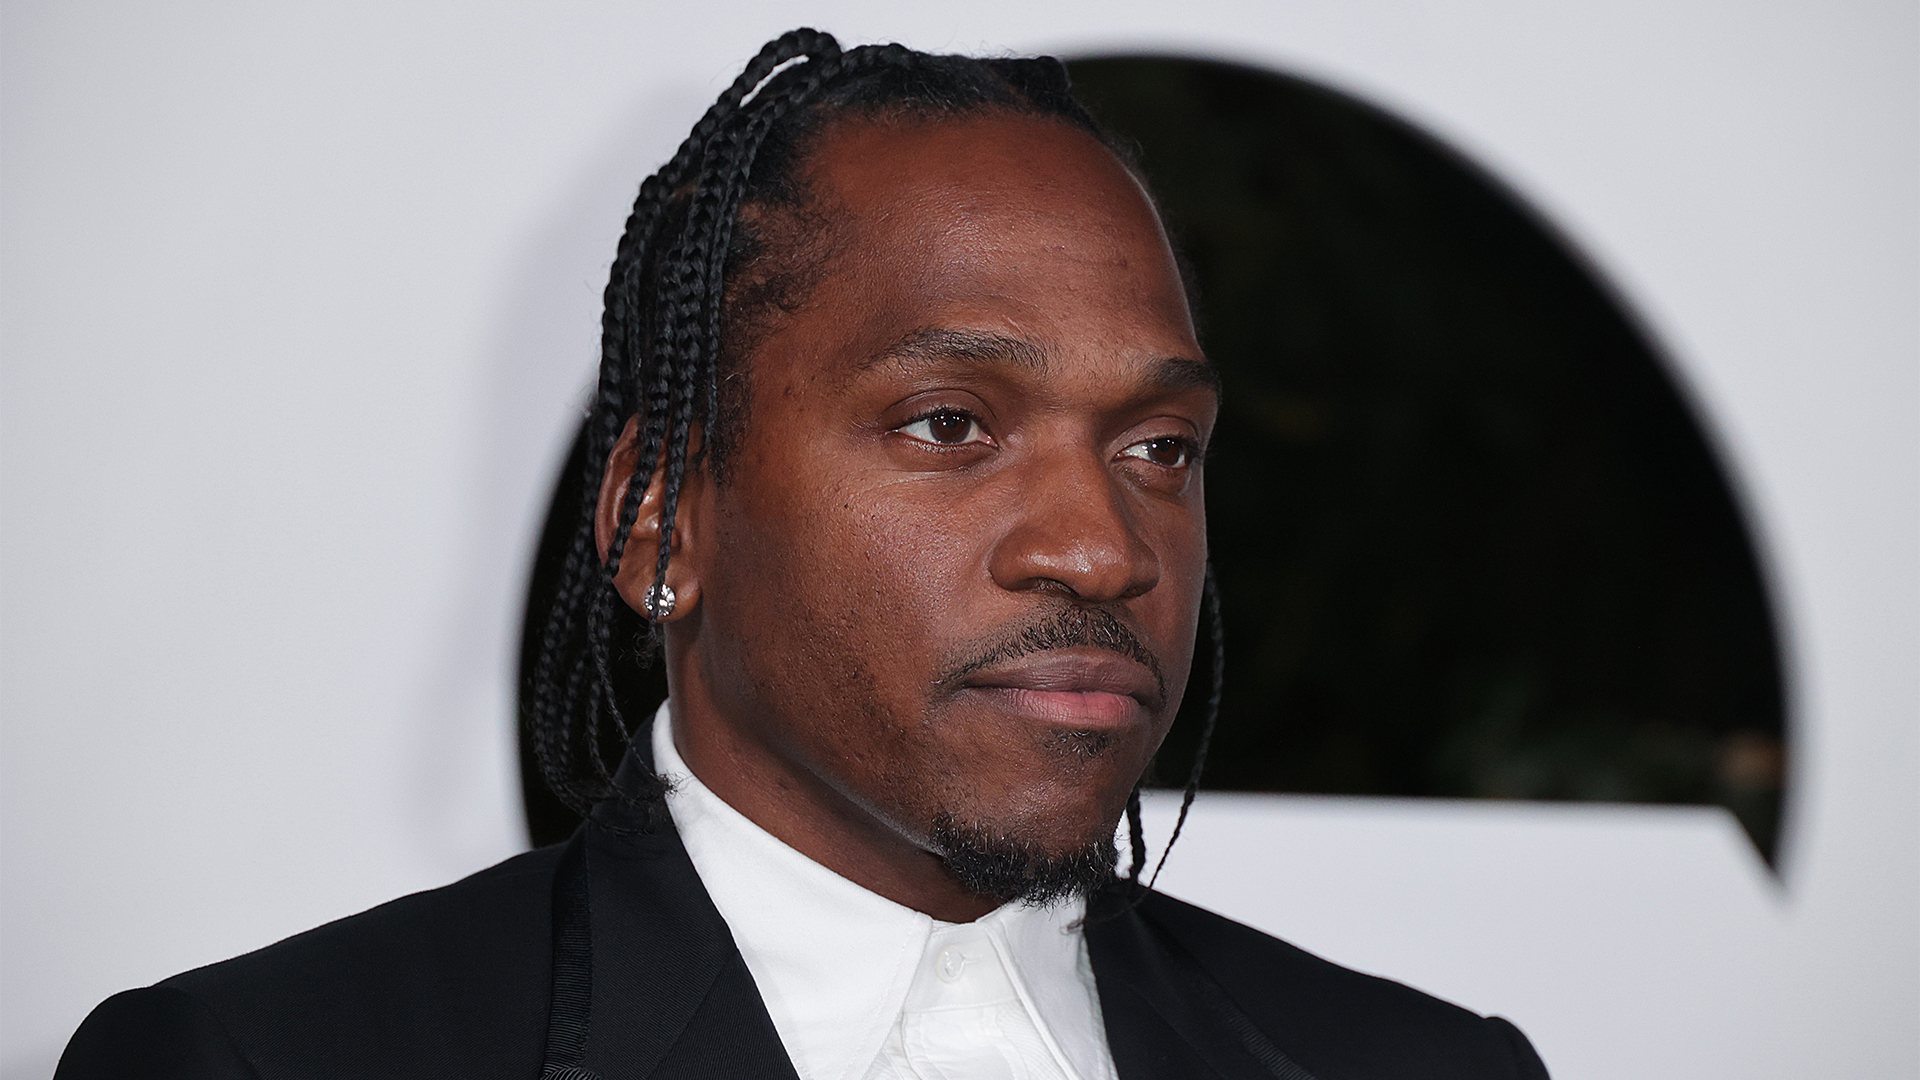 After Investing In His Friend's Medical Transportation Service, Pusha T Says It's Scaled Into A 'Really Lucrative' Business